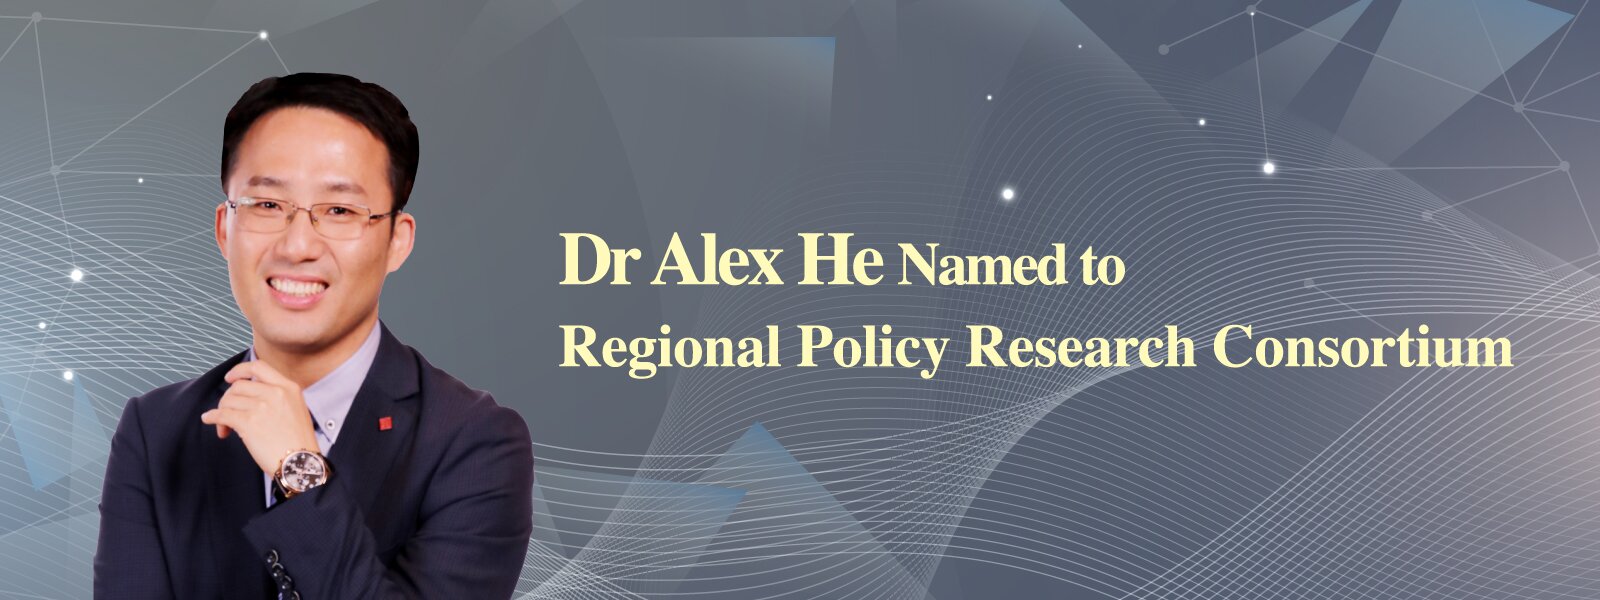 Dr Alex He Named to Regional Policy Research Consortium